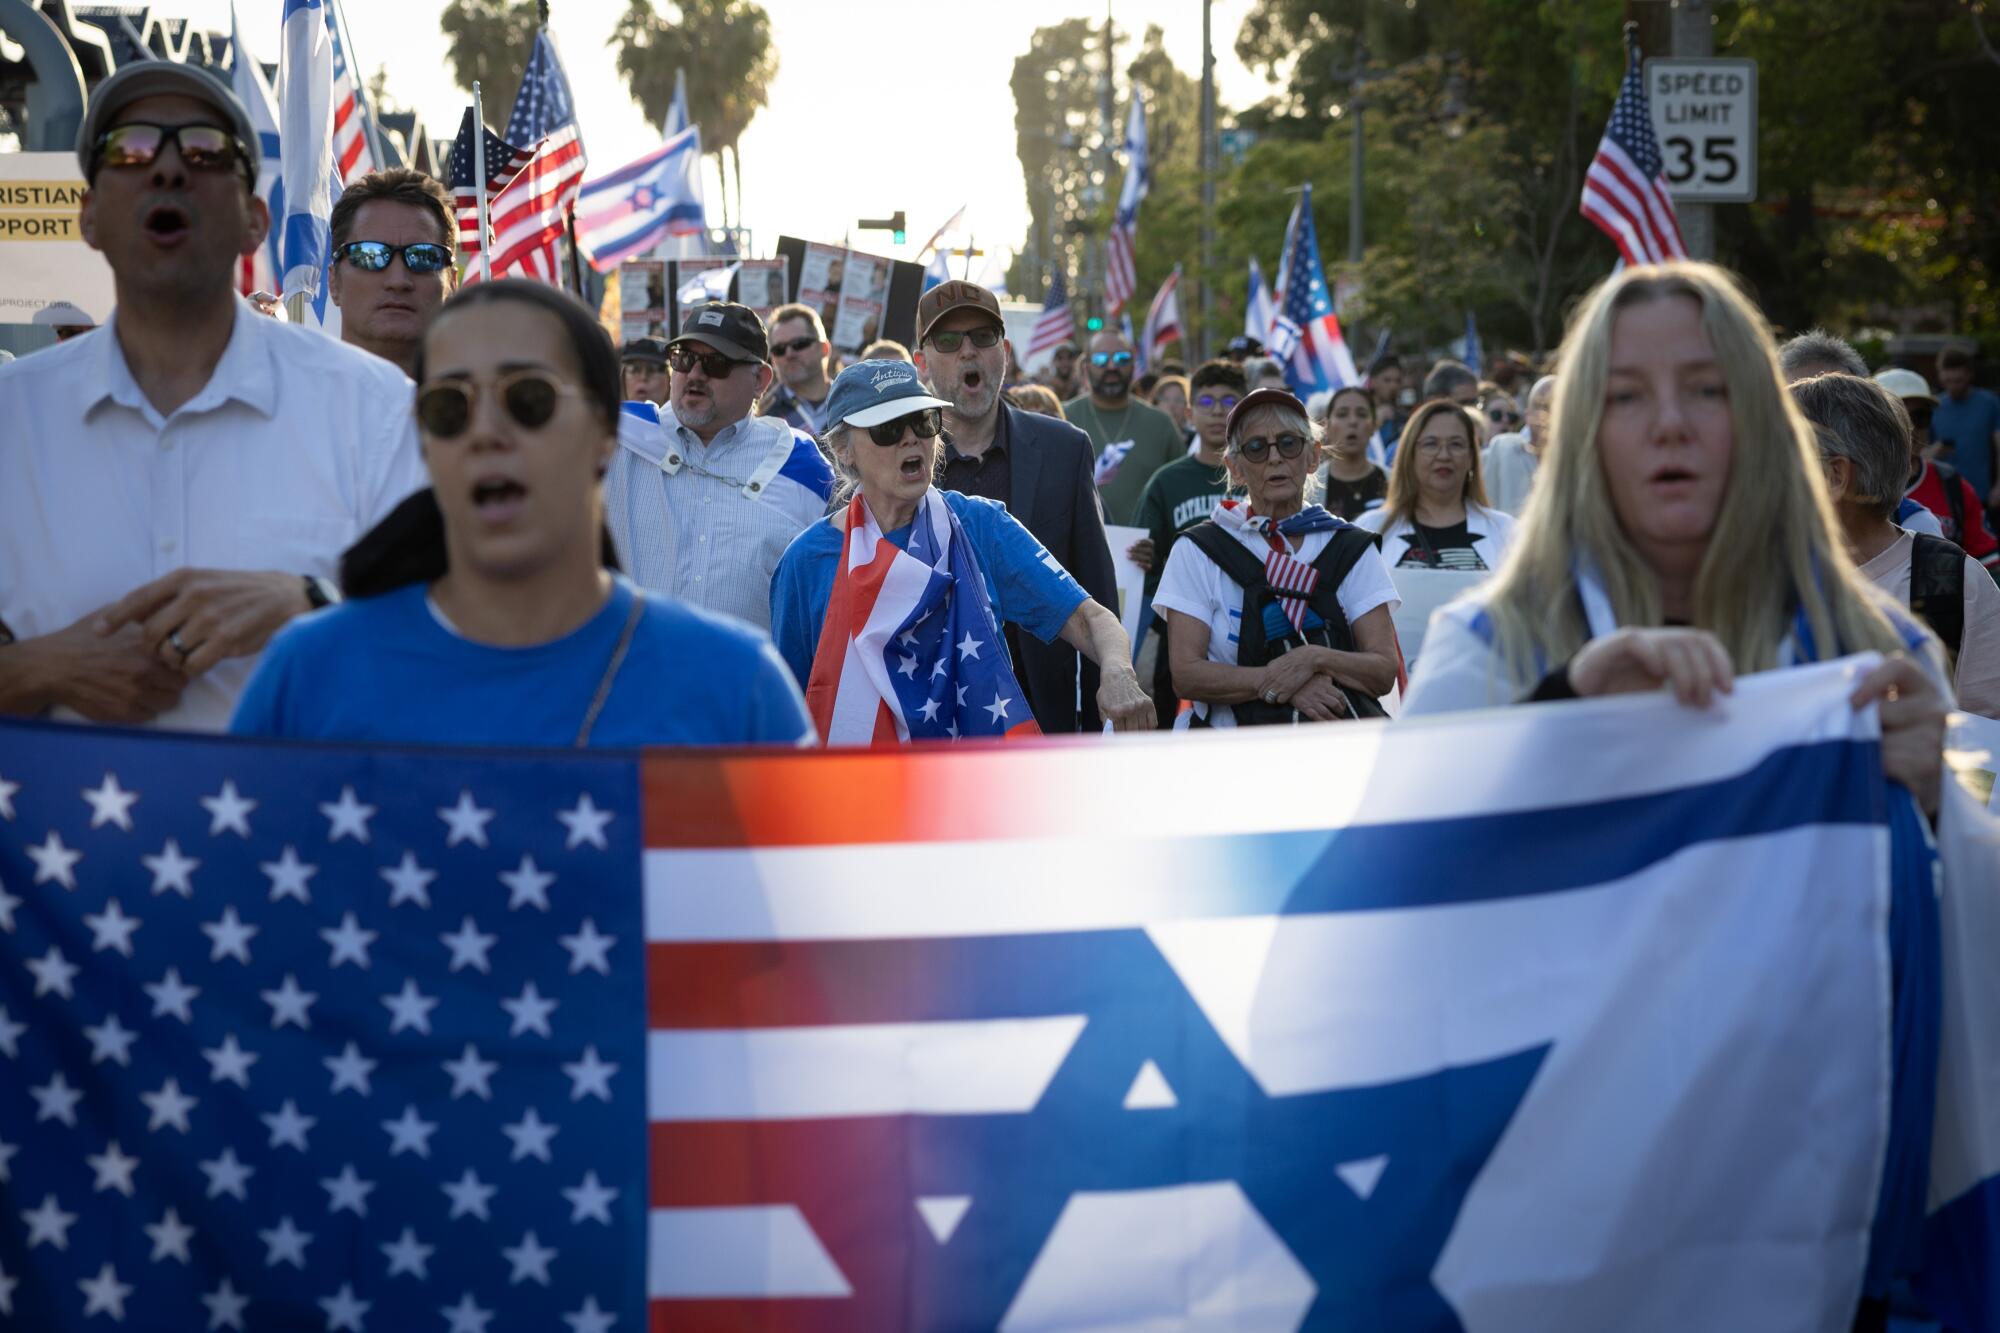 A protestor in support of Israel waves an Israeli flag while surrounded by pro-Palestinian